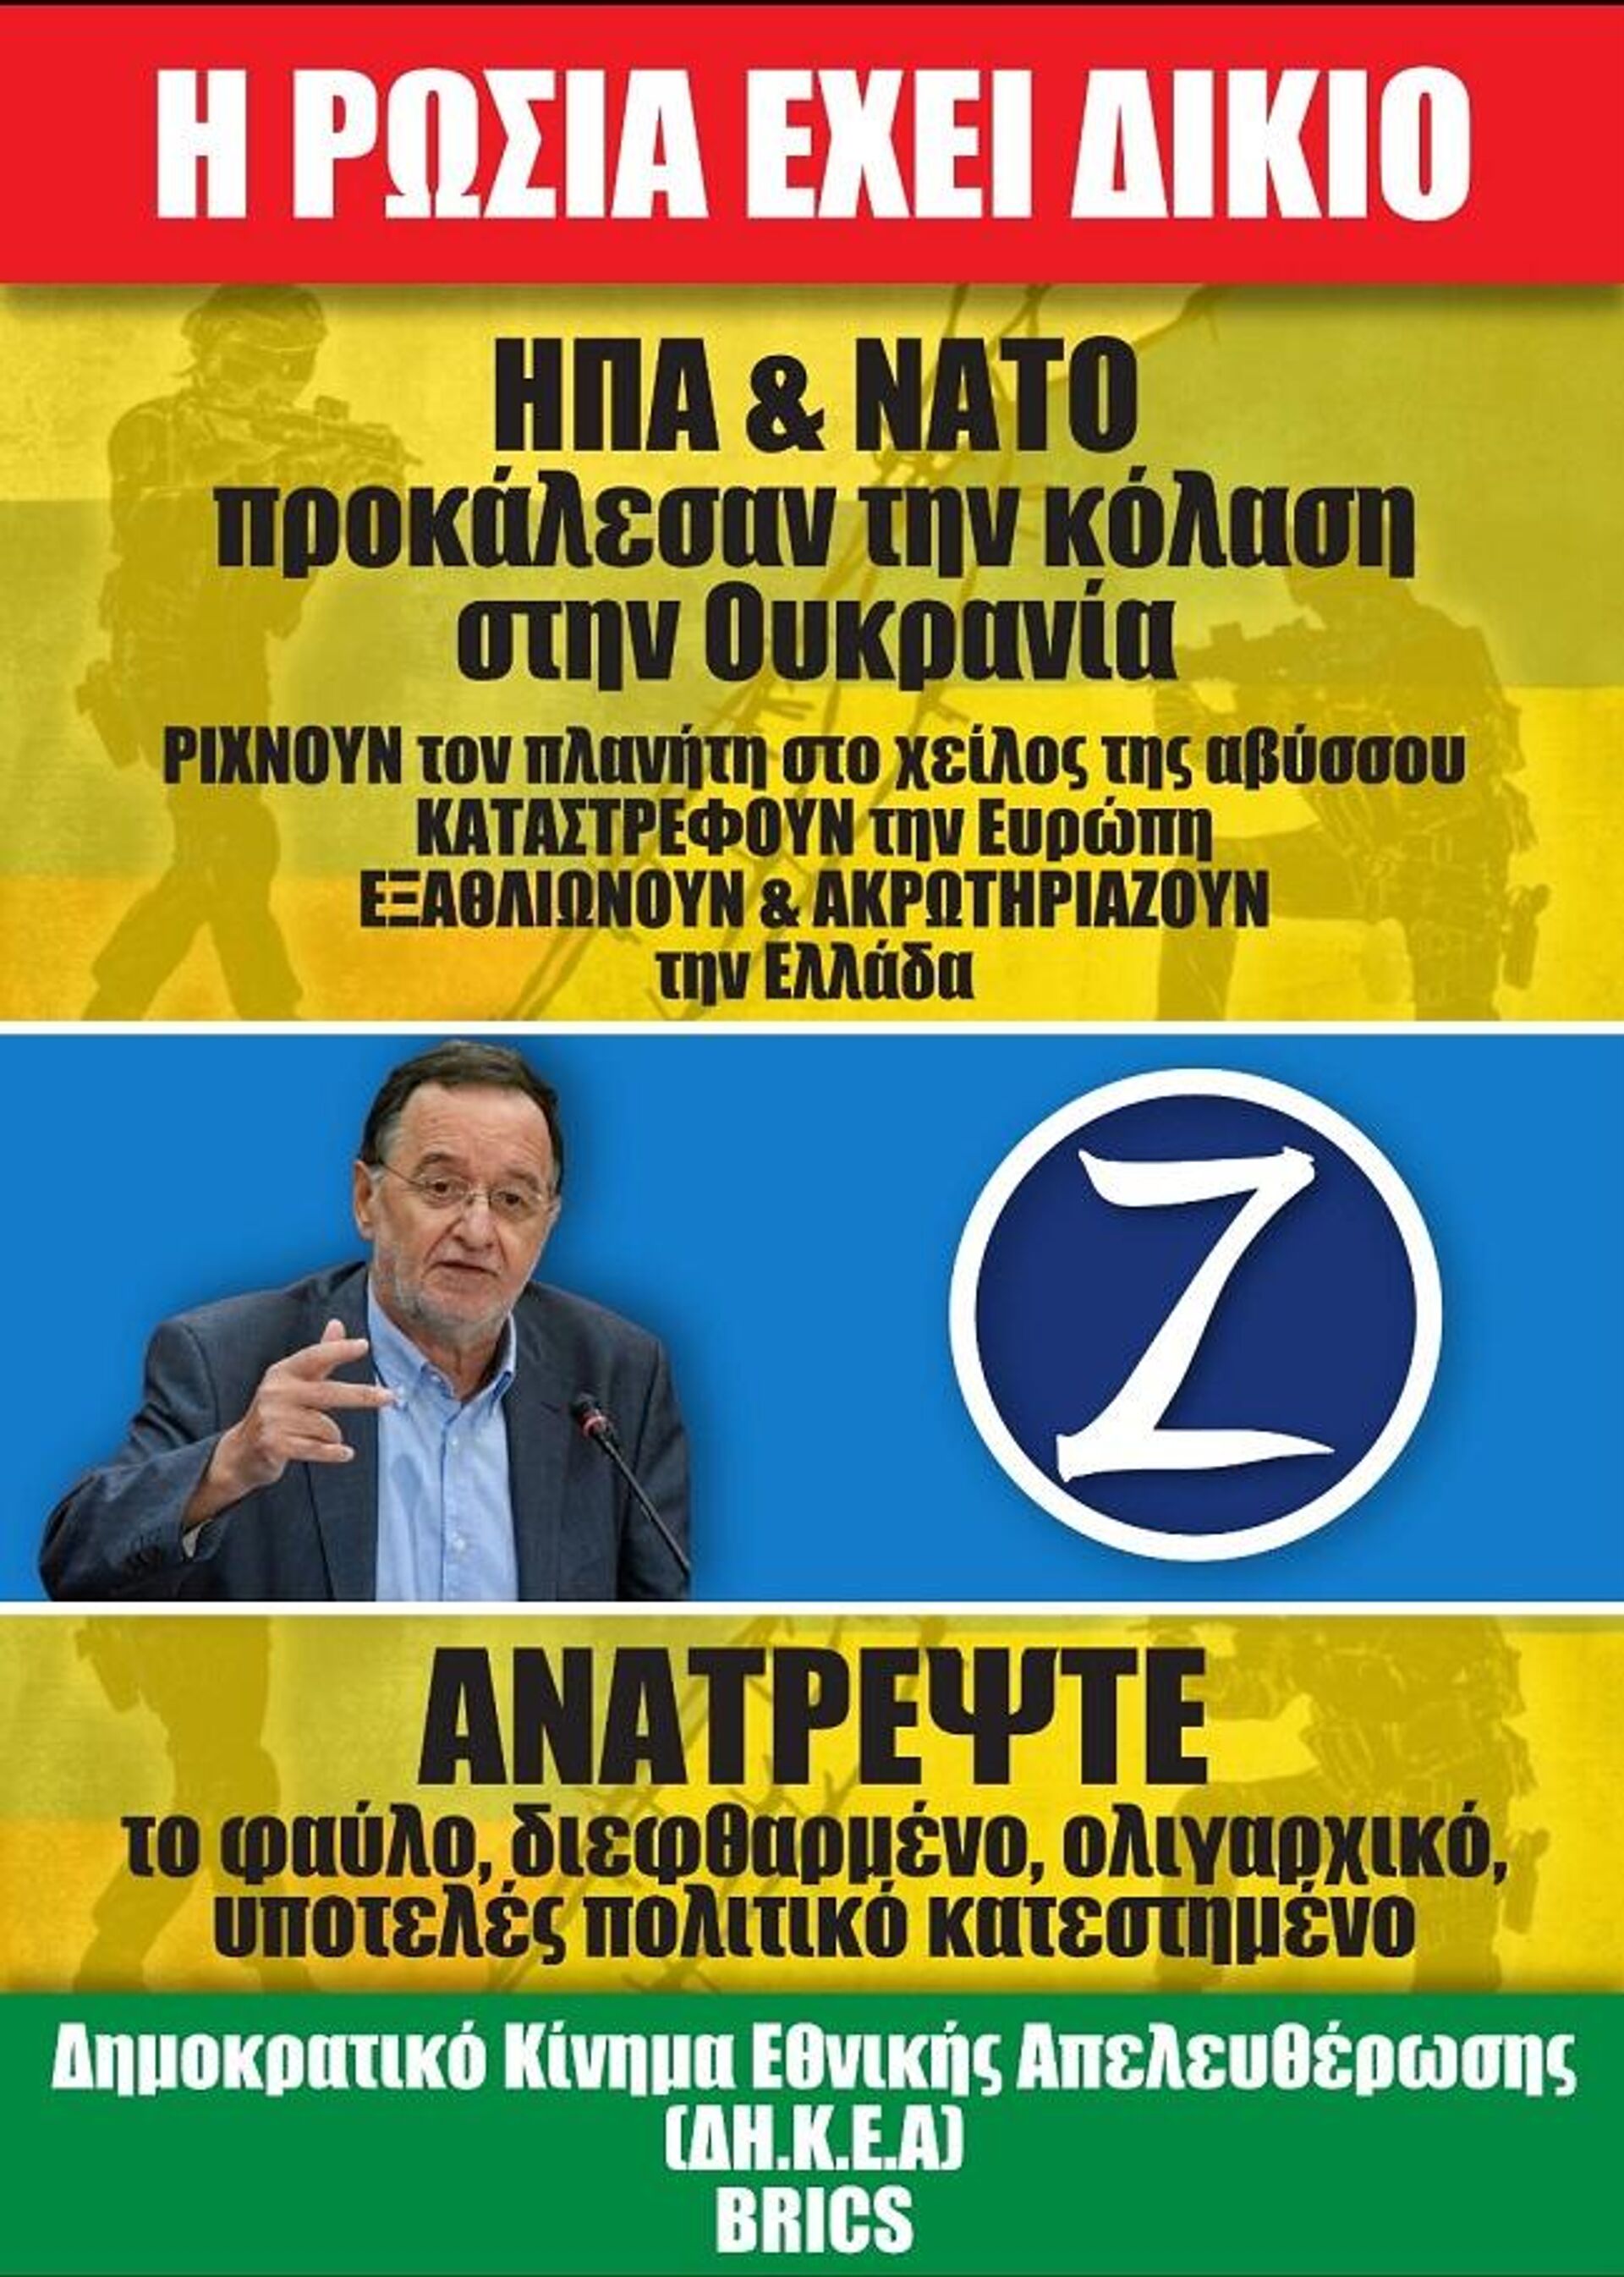 A banner of the Democratic Movement for National Liberation Party featuring its leader, Greece’s former minister of productive reconstruction, environment and energy, Panagiotis Lafazanis - Sputnik International, 1920, 24.07.2022